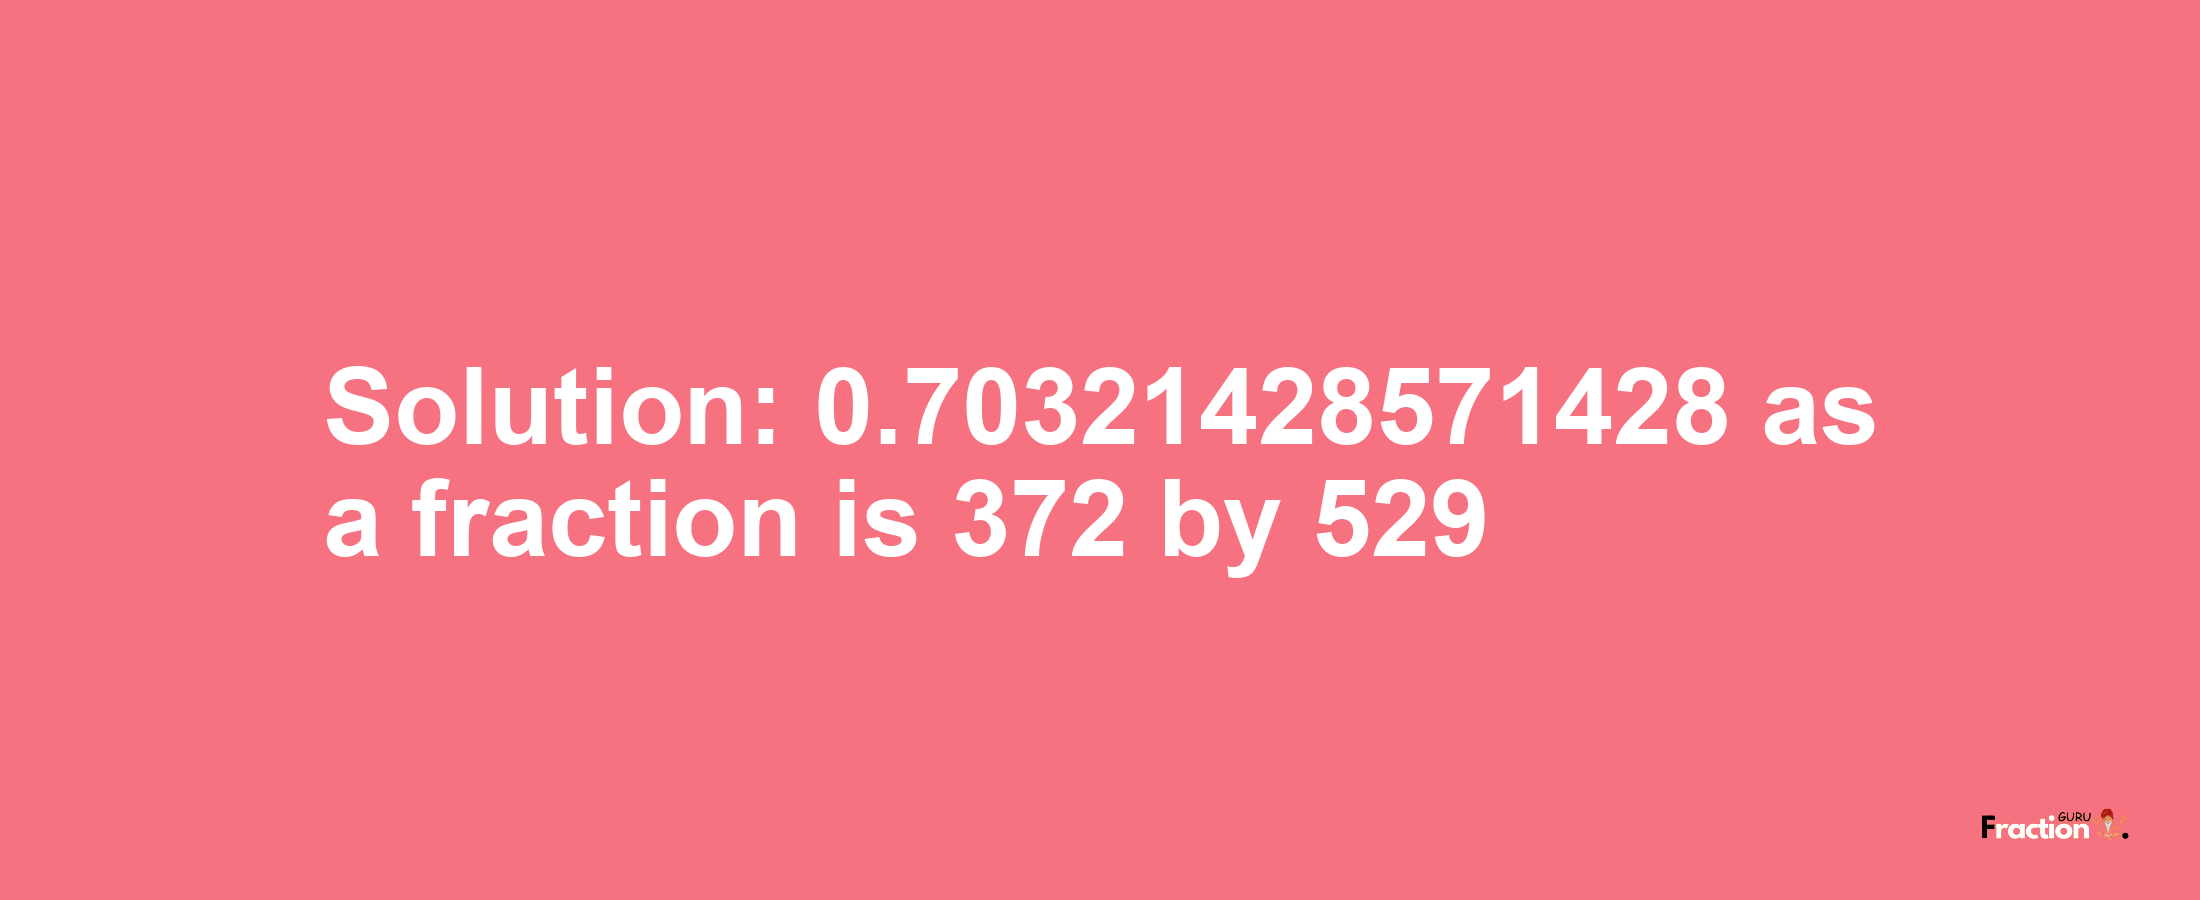 Solution:0.70321428571428 as a fraction is 372/529